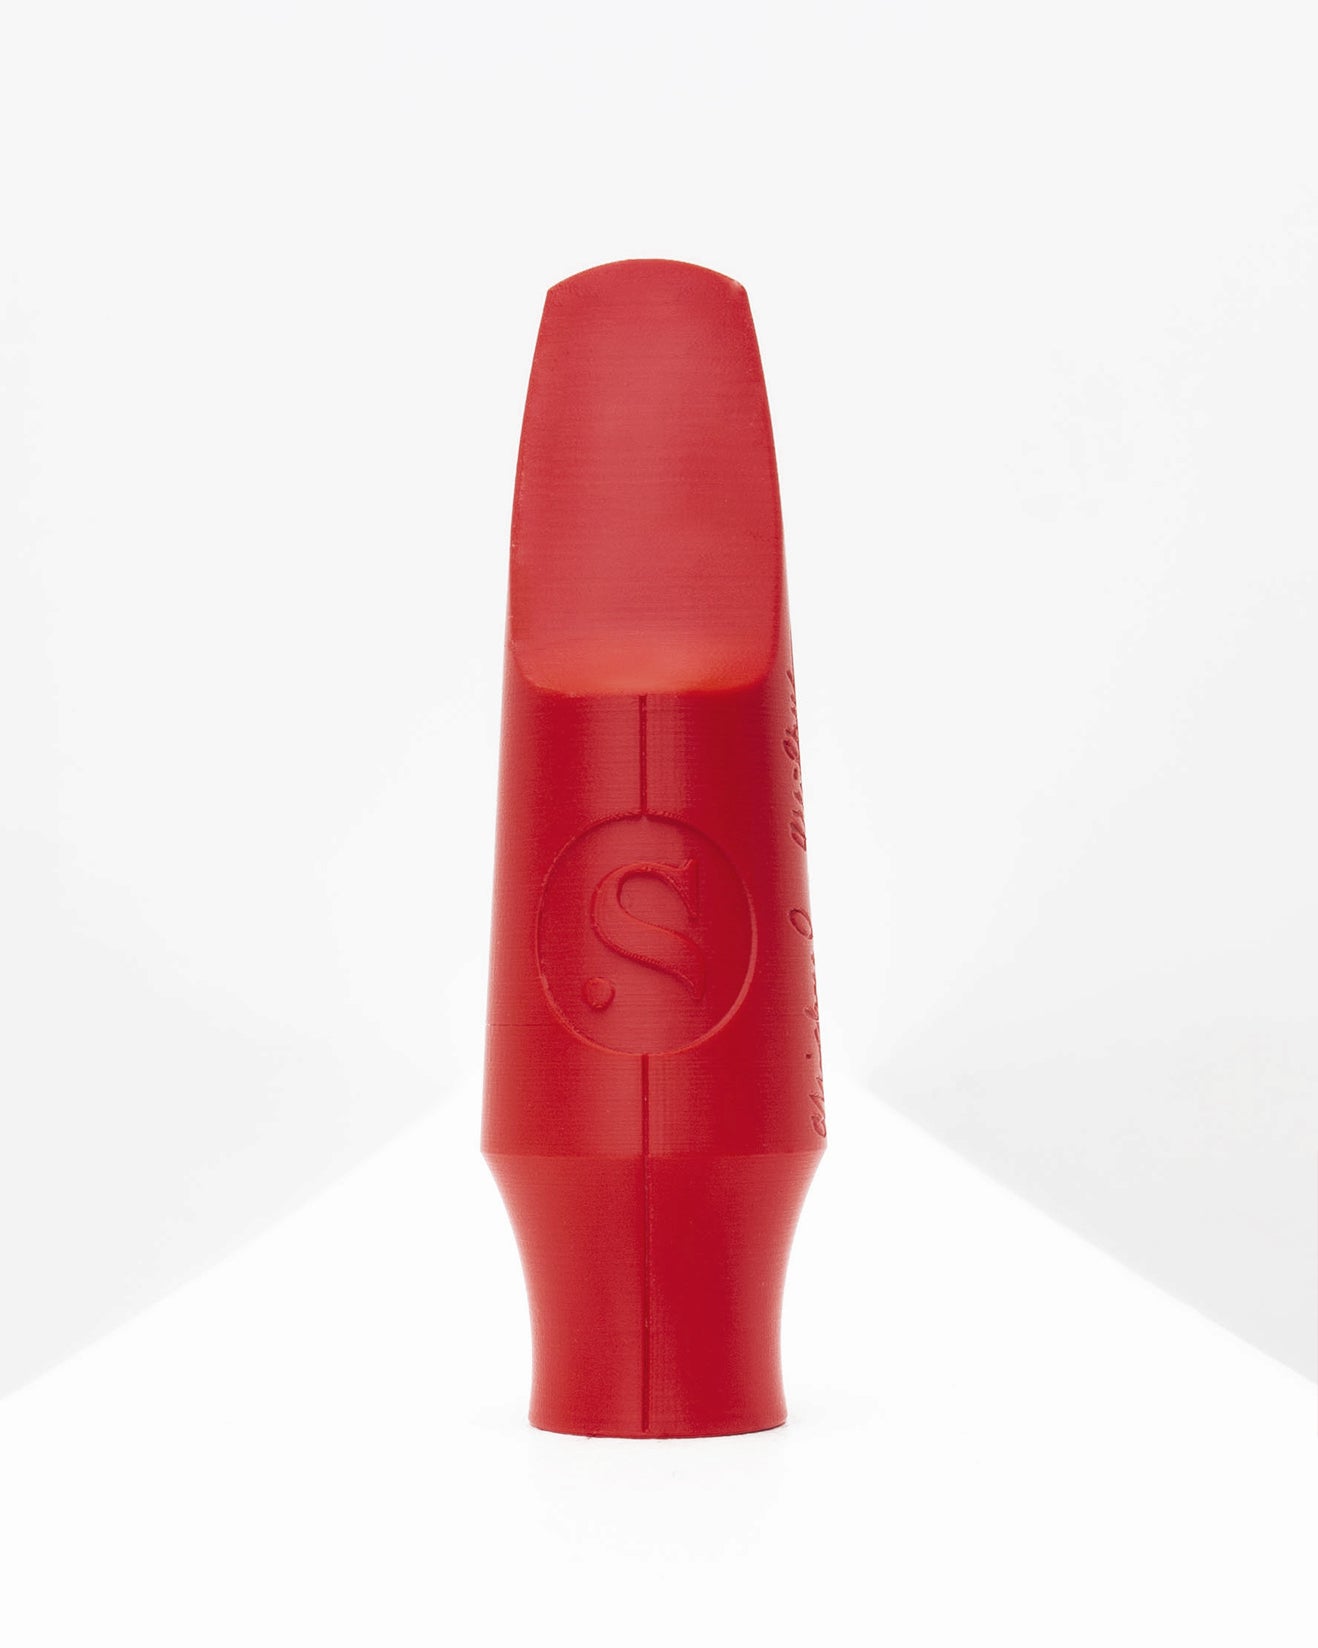 Tenor Signature Saxophone mouthpiece - Michael Wilbur by Syos - 9 / Carmine Red